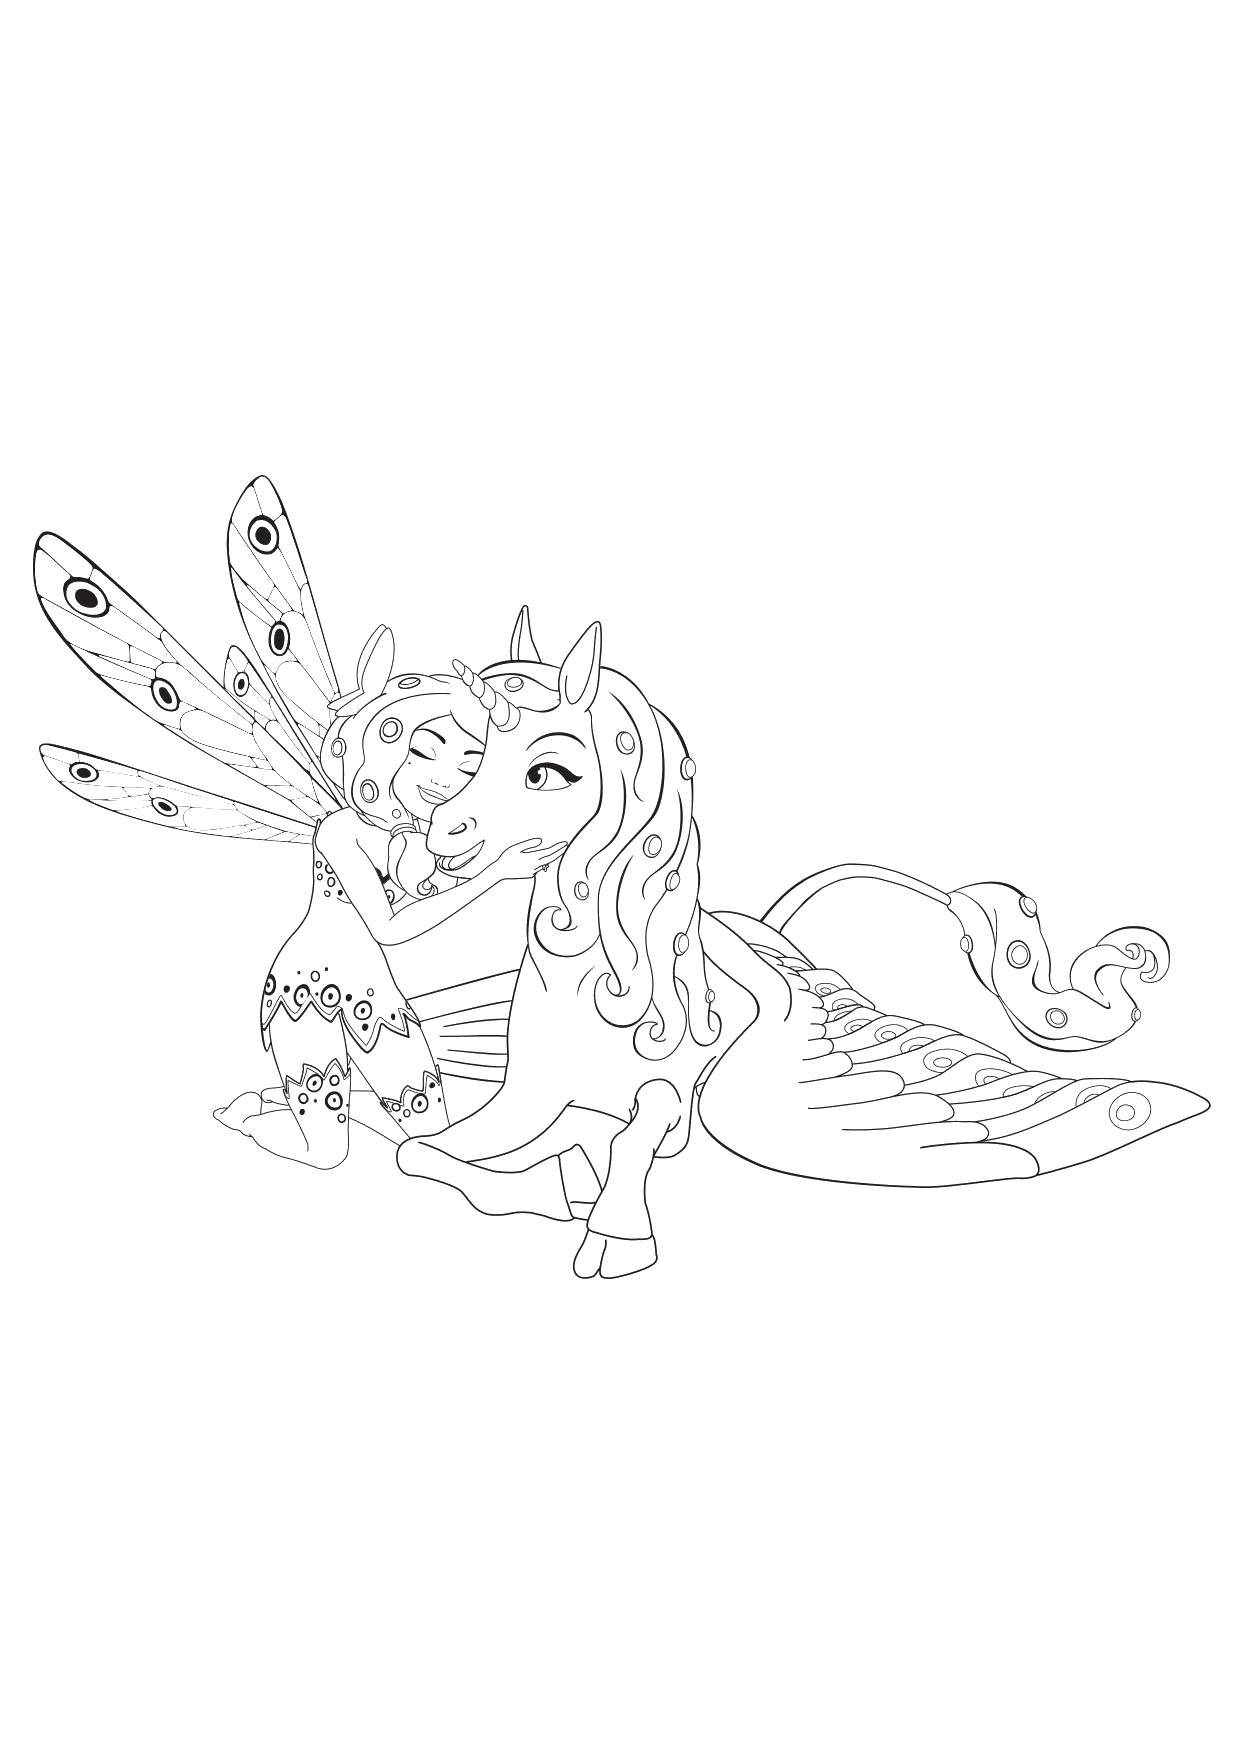 Coloring The fairy and edinurgh. Category MIA and I. Tags:  Cartoon character.